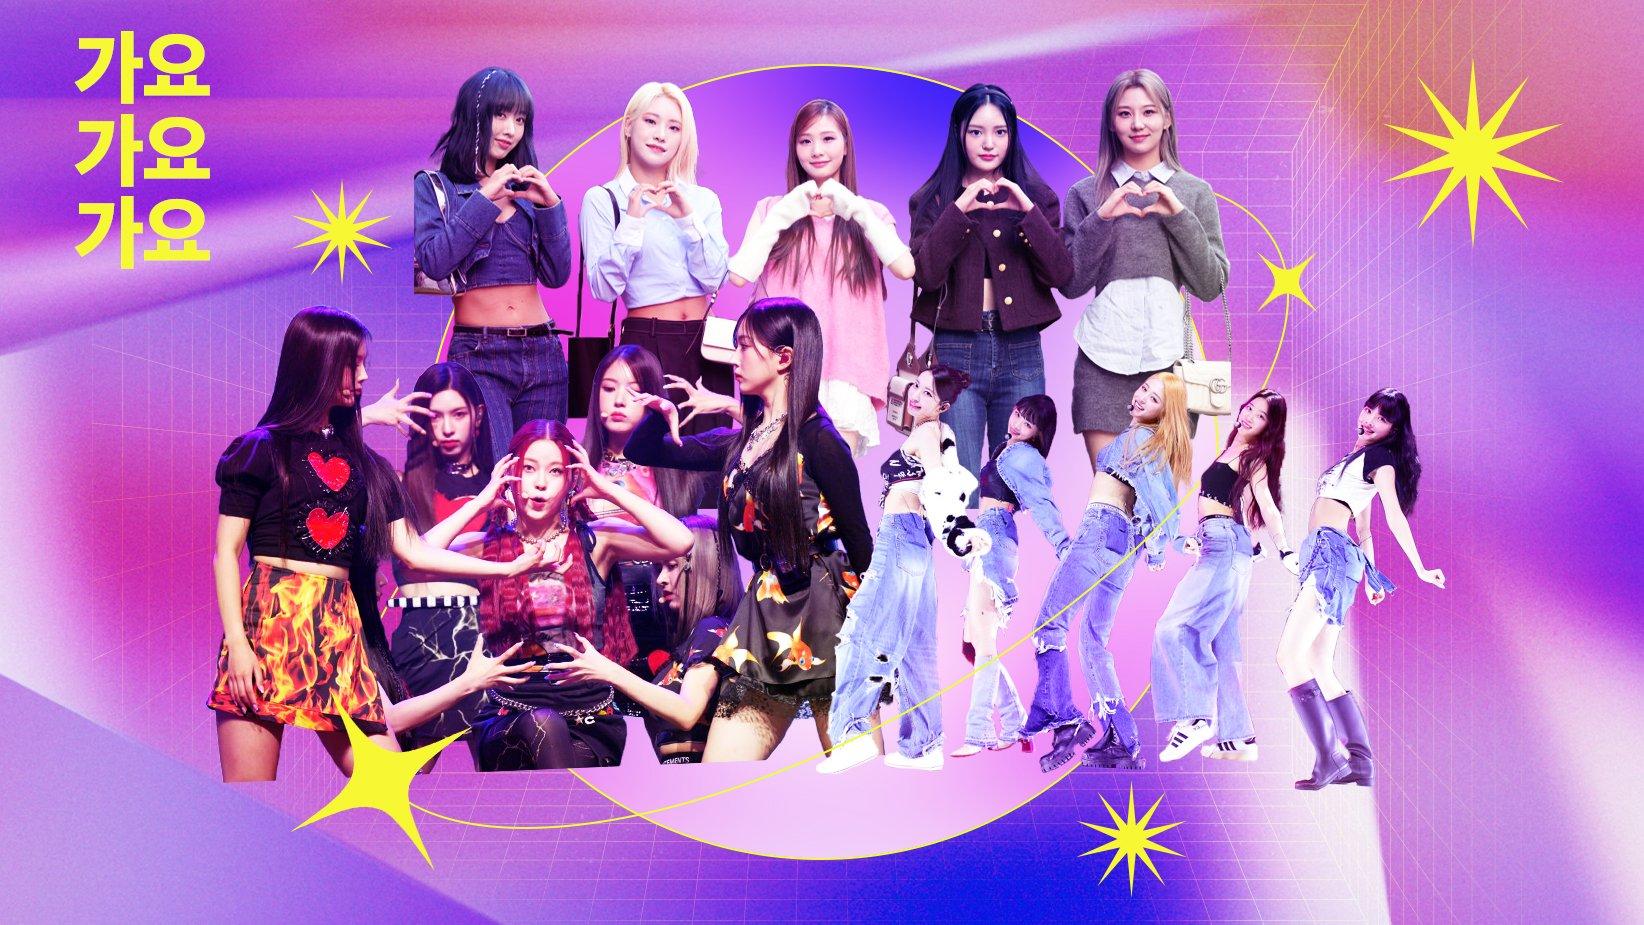 K Pop Rookie Girl Groups To Watch In 2023: Le Sserafim, Mimiirose, Ive & More